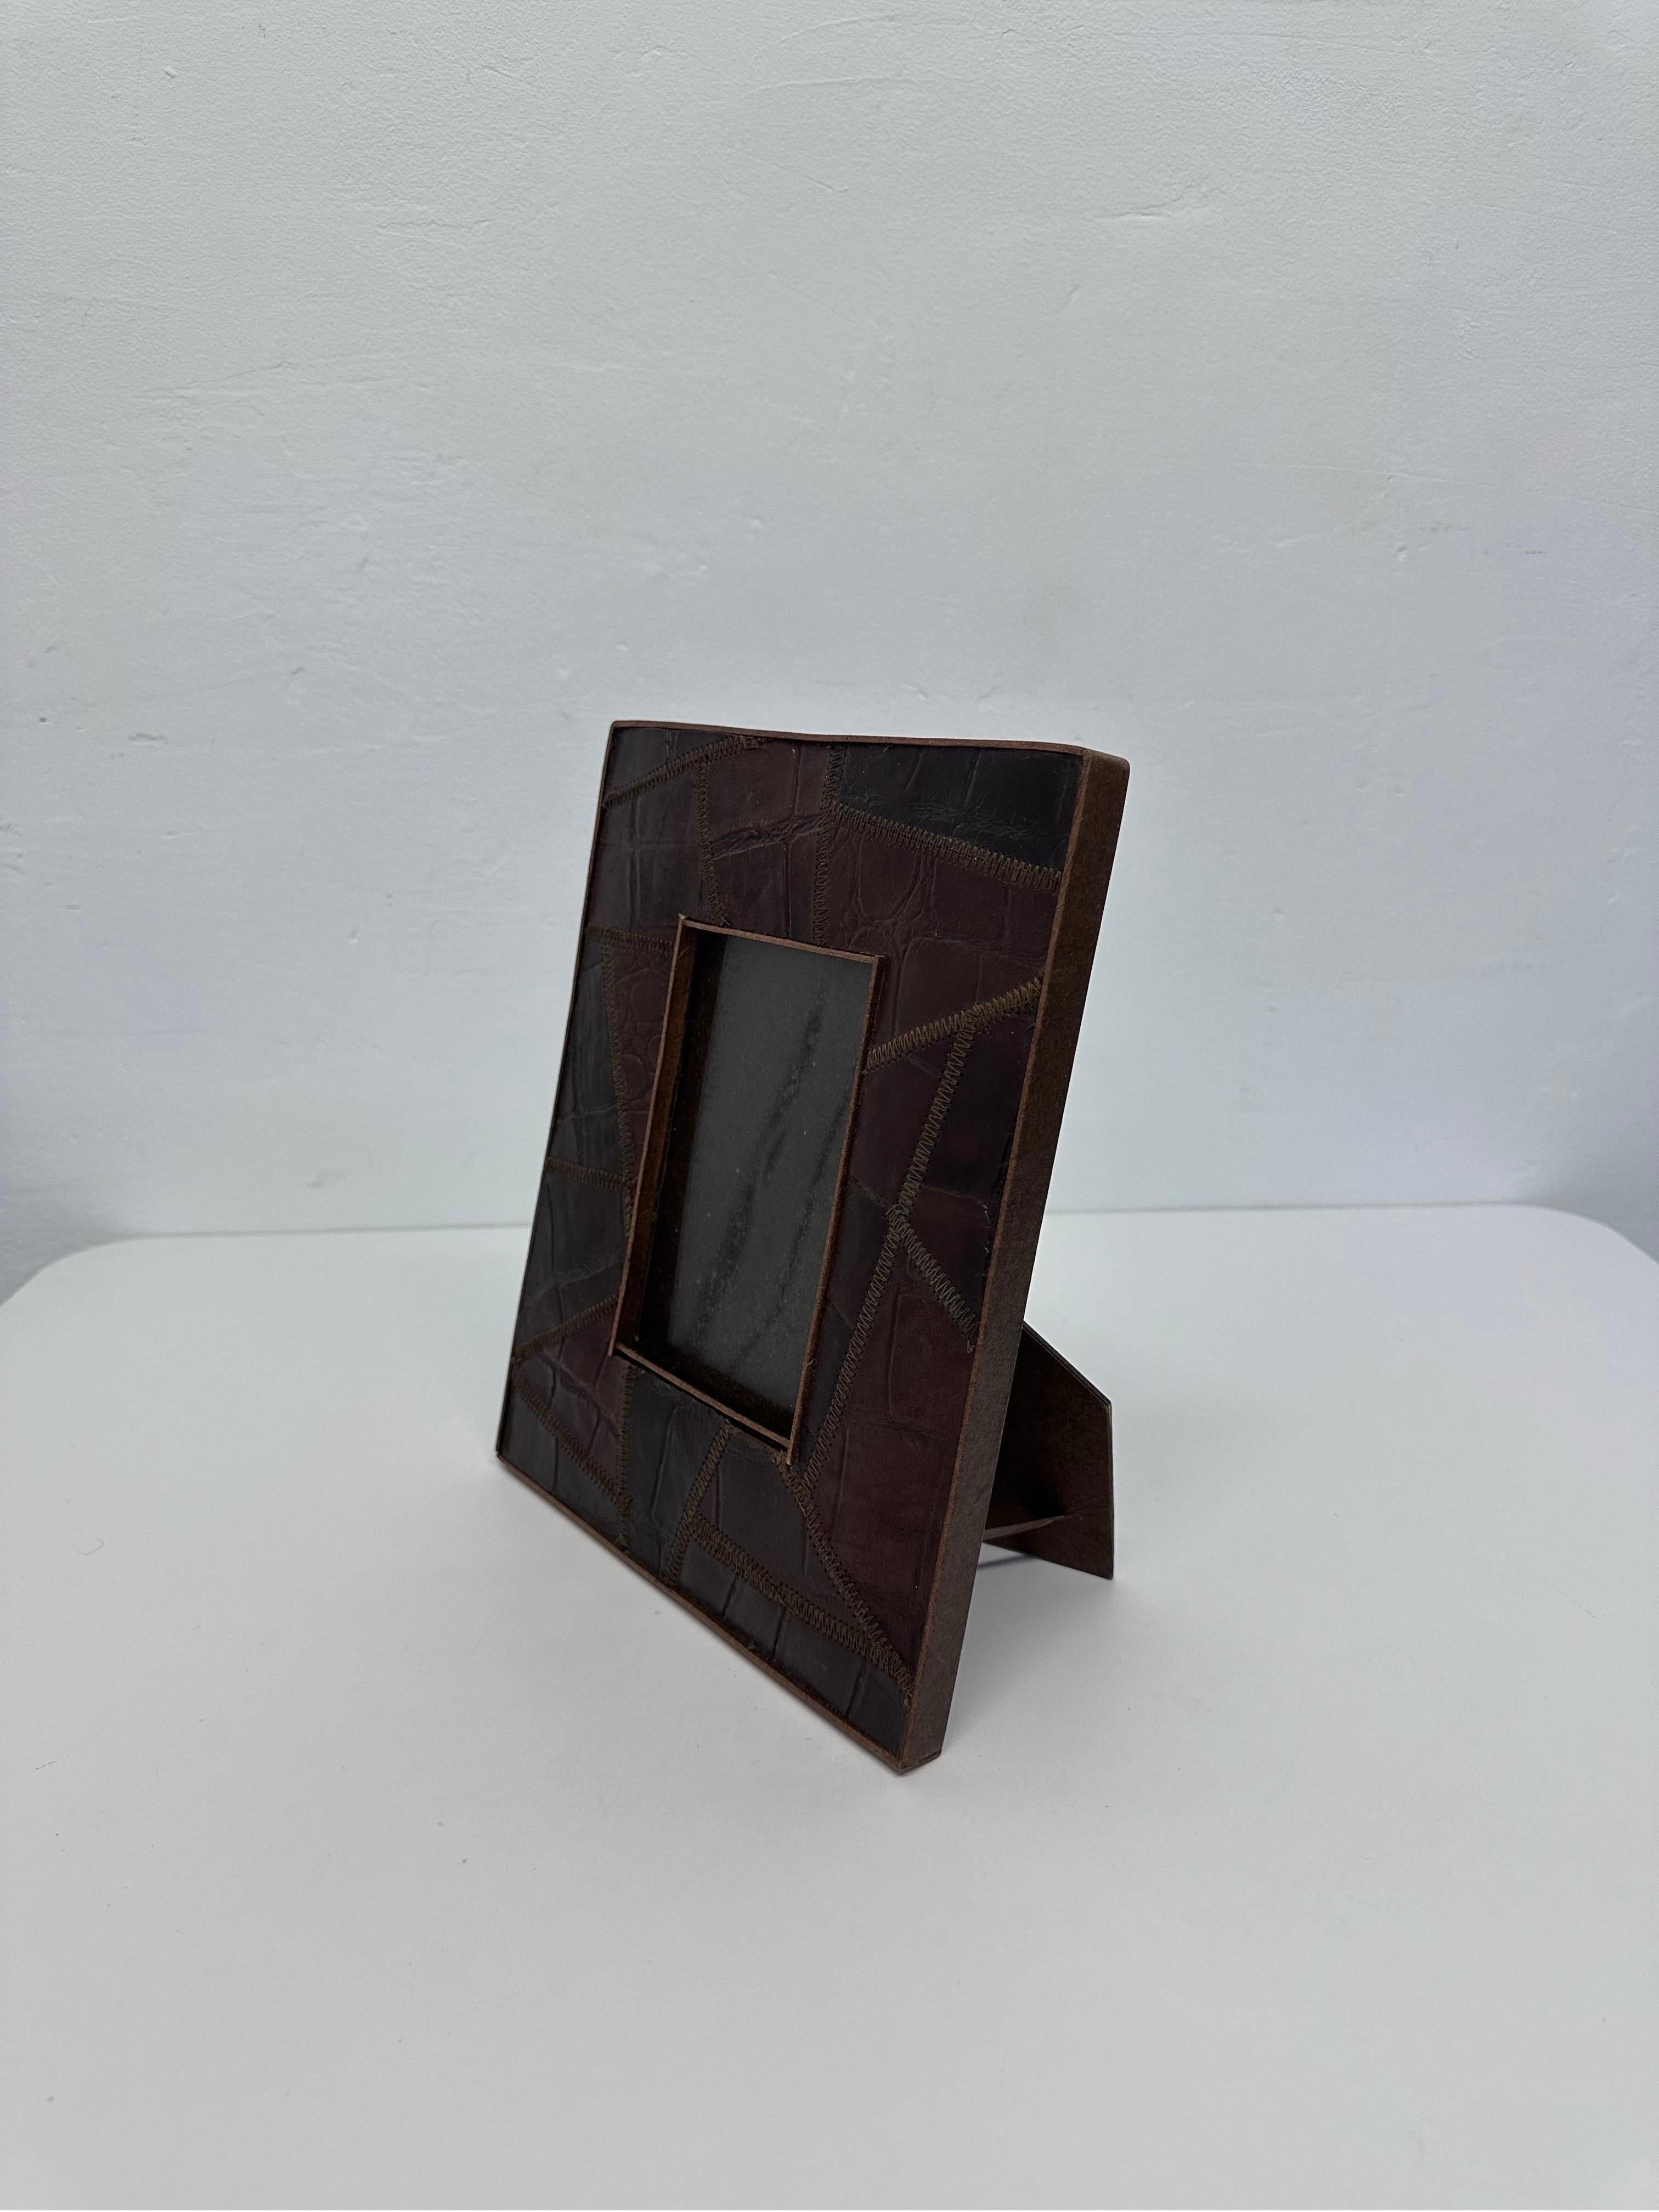 Organic Modern Stitched and Embossed Leather Photo Frame by Palecek For Sale